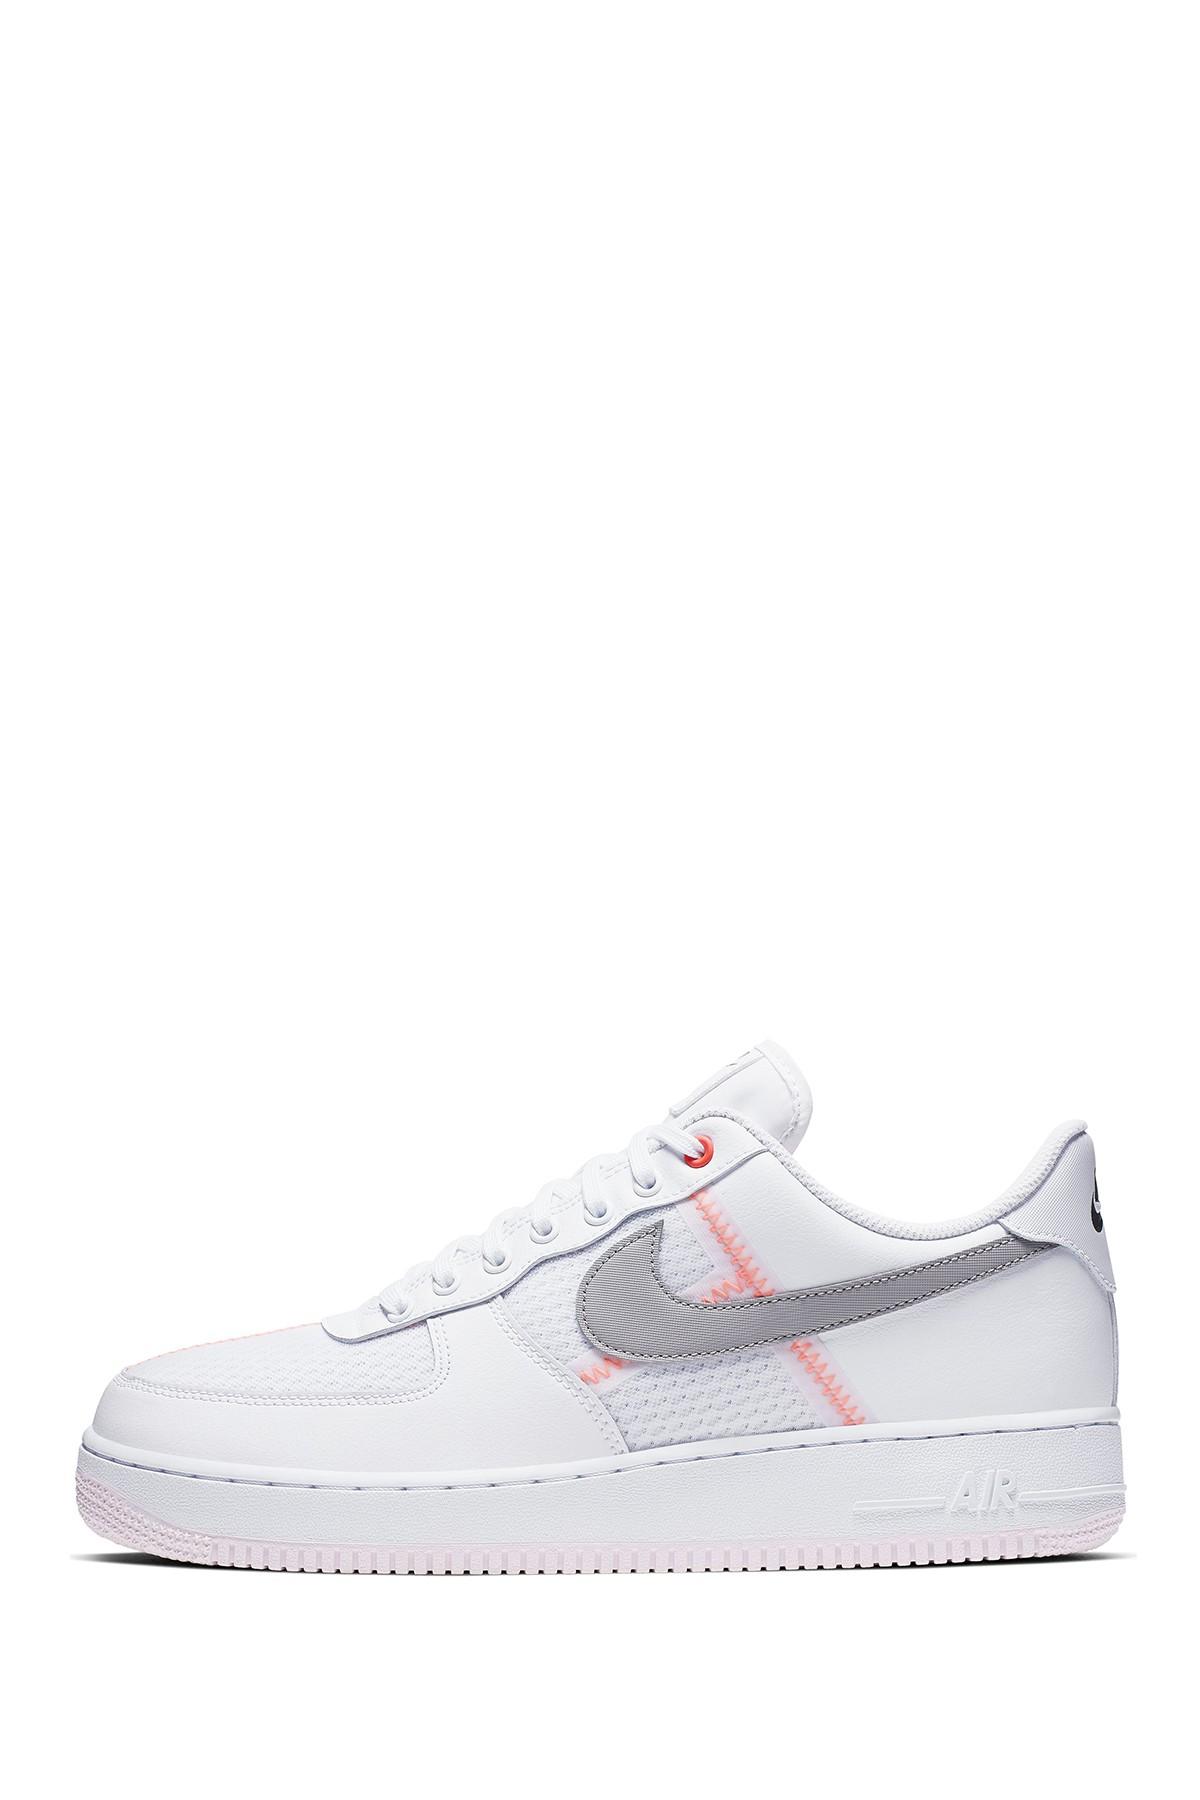 air force 1 low transparent white grey